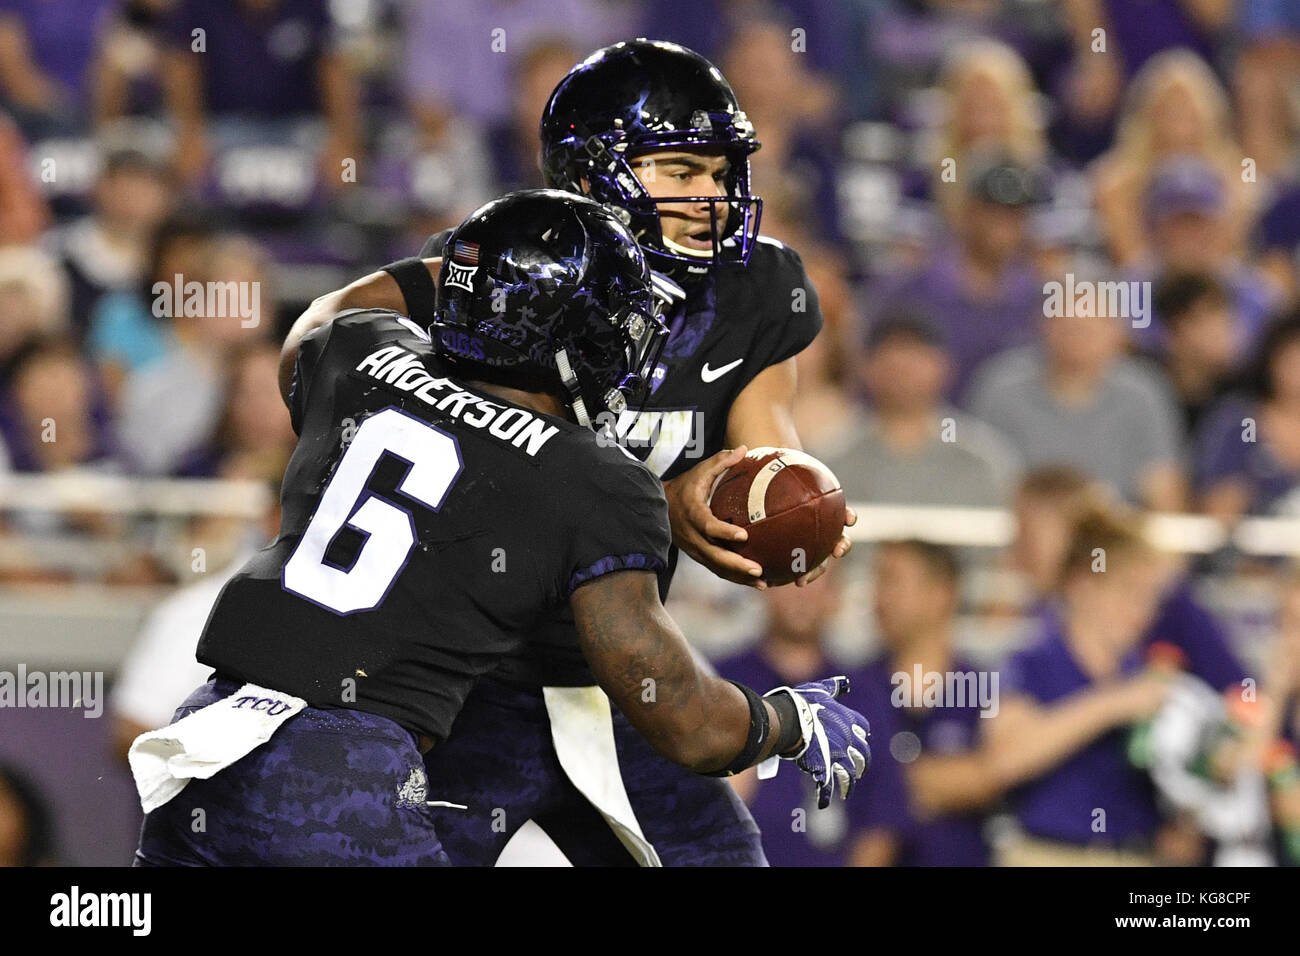 Ft. 4th Nov, 2017. TCU Horned Frogs quarterback Kenny Hill (7) hands the ball off during an NCAA football game between the Texas Longhorns and the TCU Horned Frogs at Amon G. Carter Stadium in Ft. Worth, Texas. Shane Roper/CSM/Alamy Live News Stock Photo